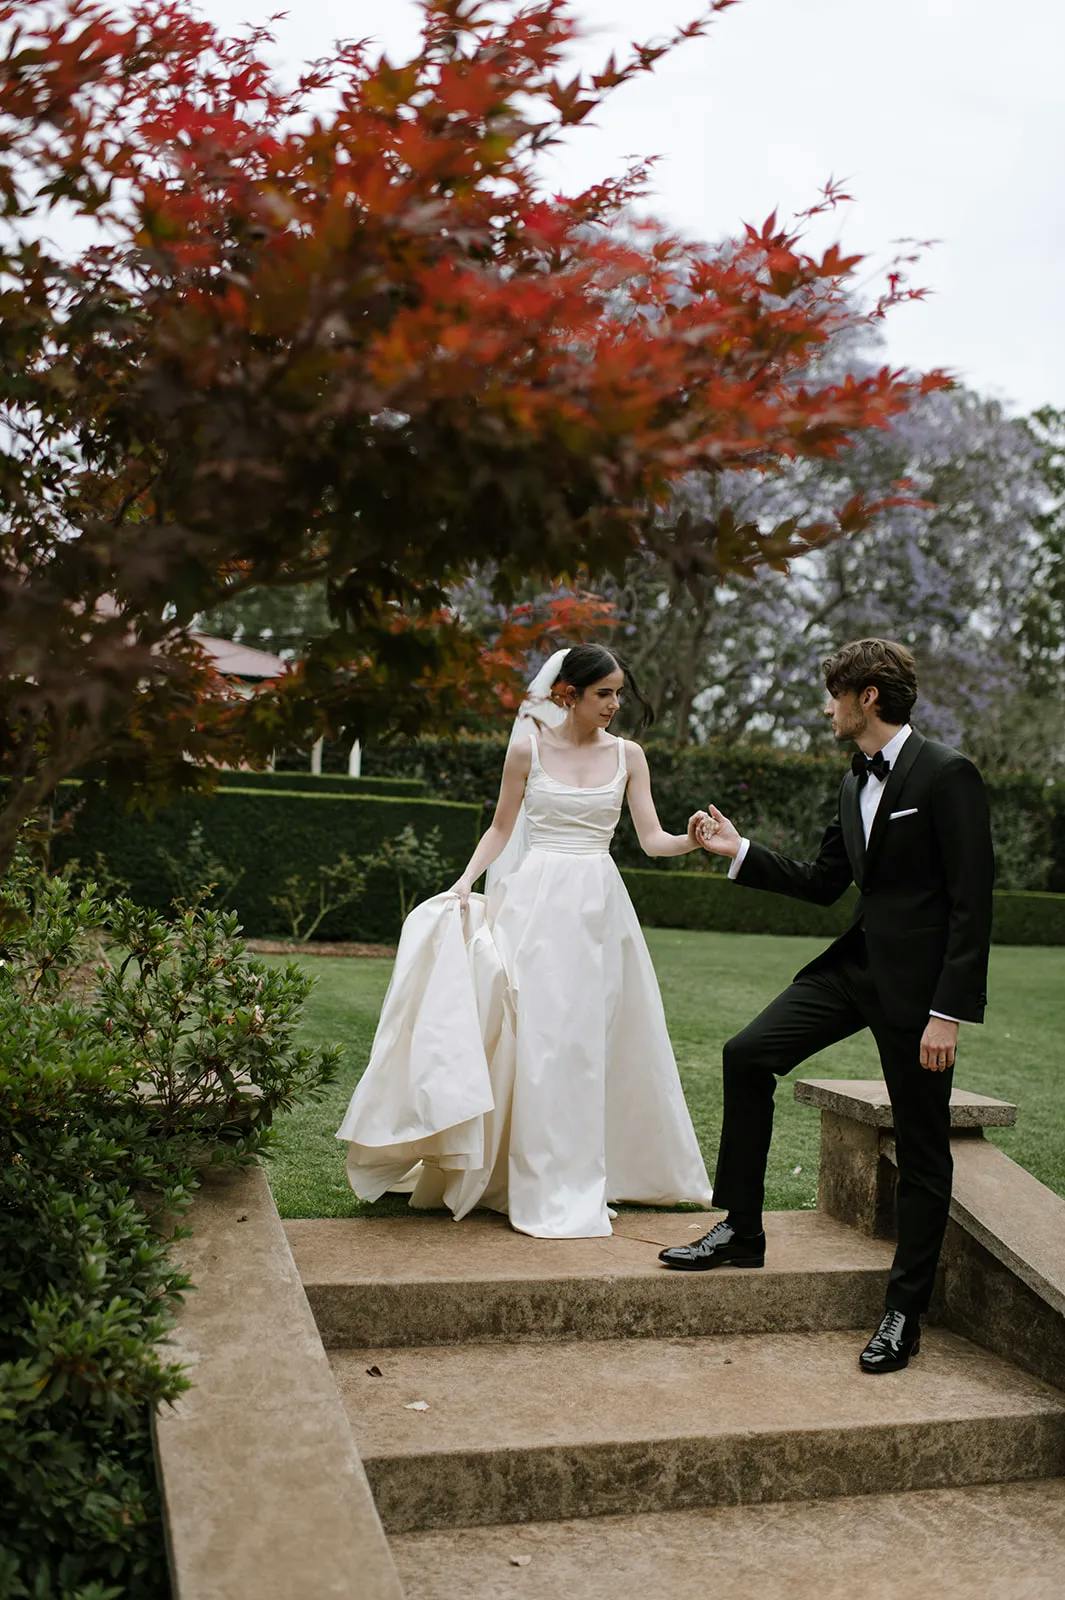 A bride in a white wedding dress holds her skirt as she steps down stone steps, assisted by a groom in a black tuxedo. They are in an outdoor garden with lush greenery and red autumn leaves on a tree in the foreground.